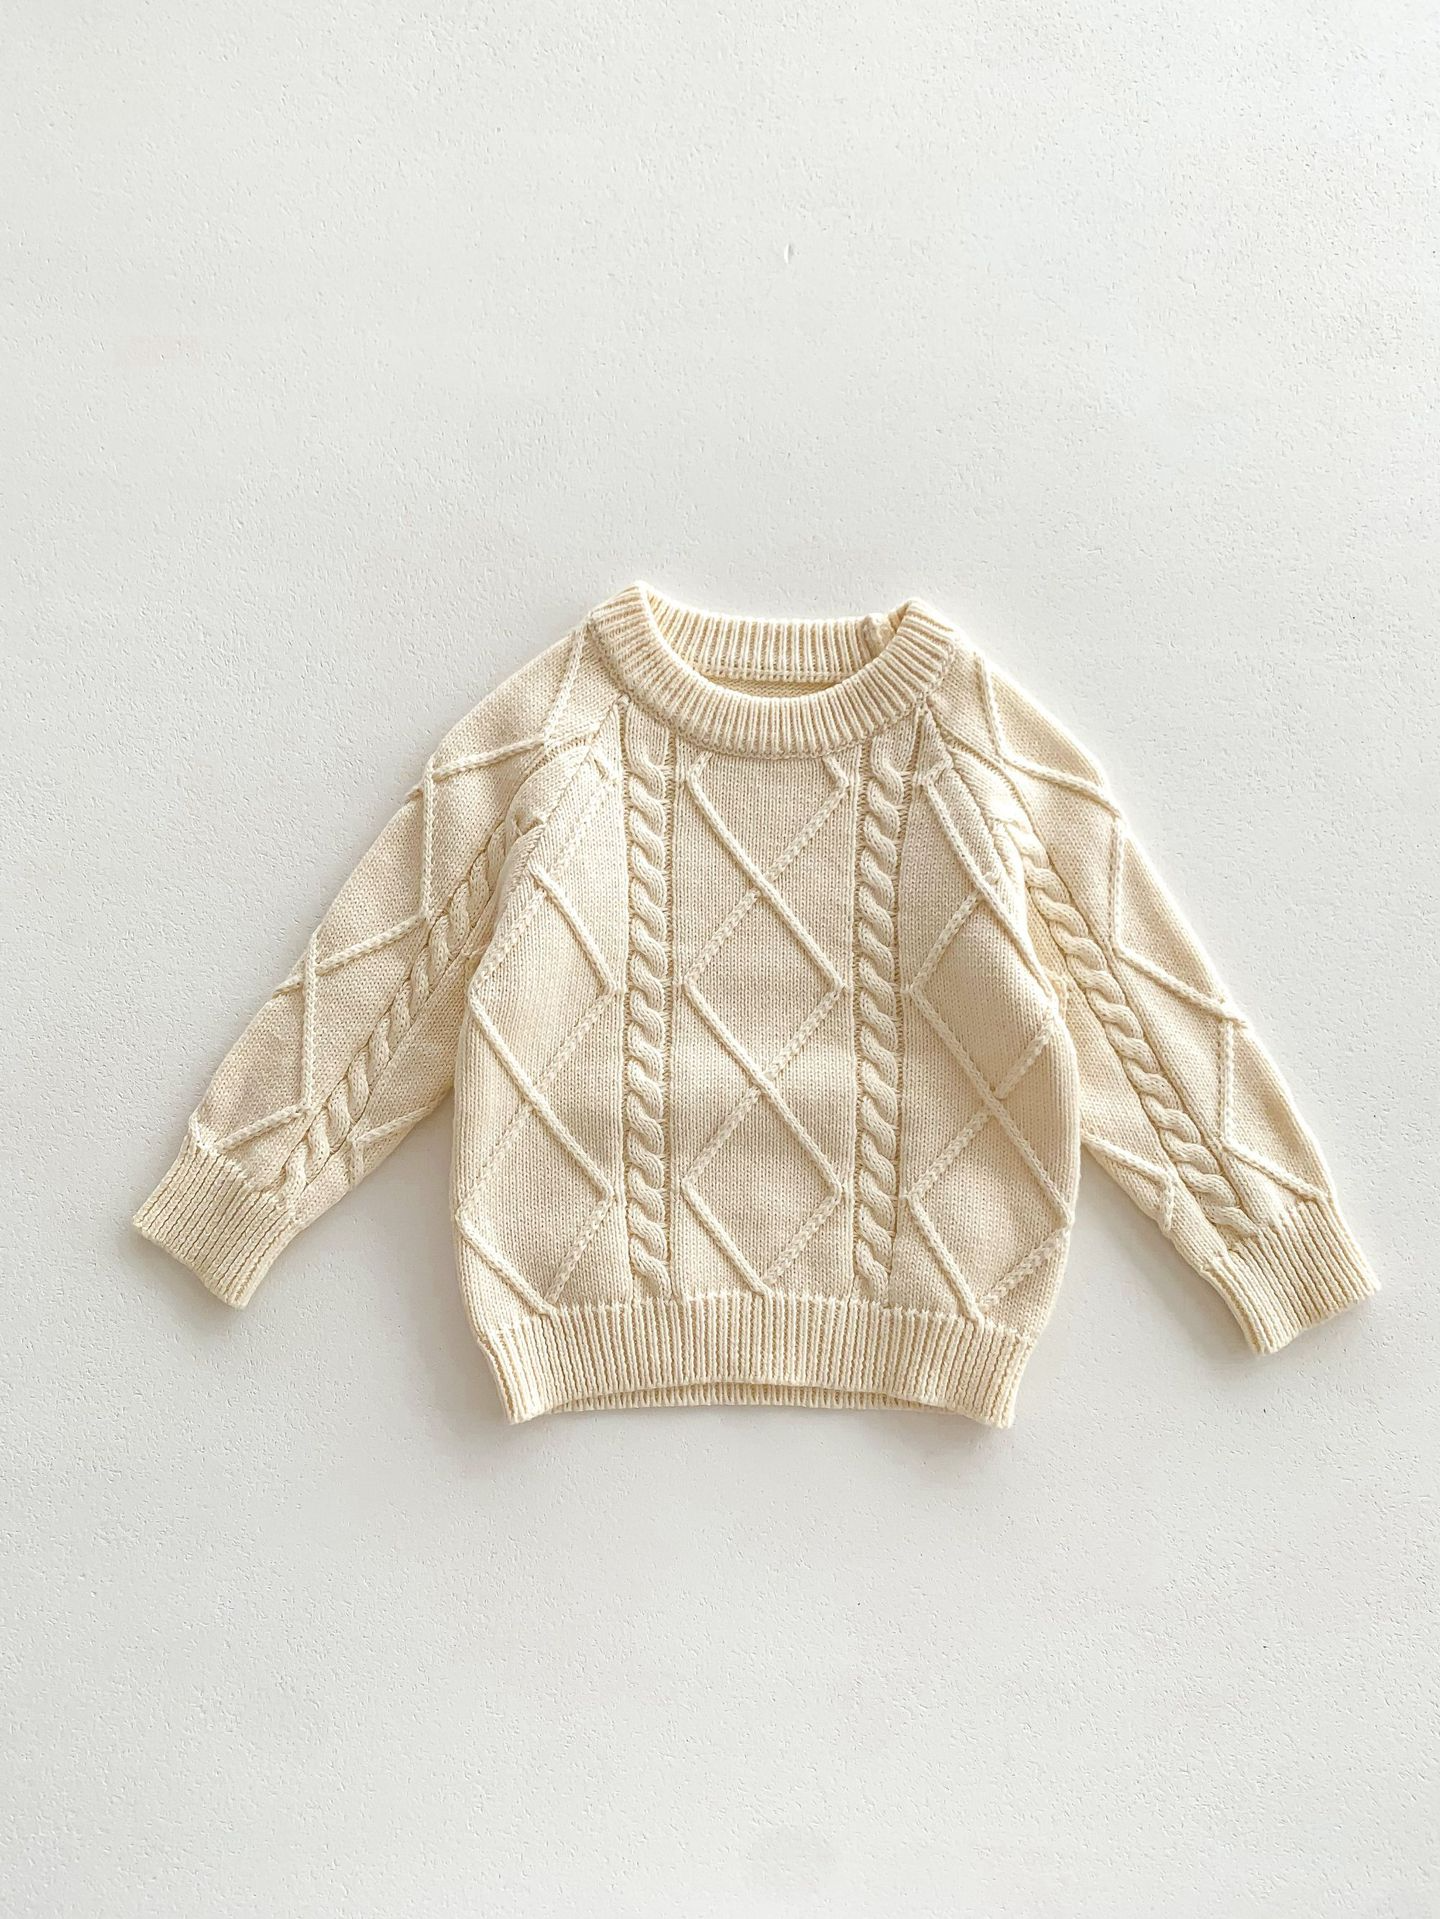 Cotton Knit Baby Overall and/or Sweater